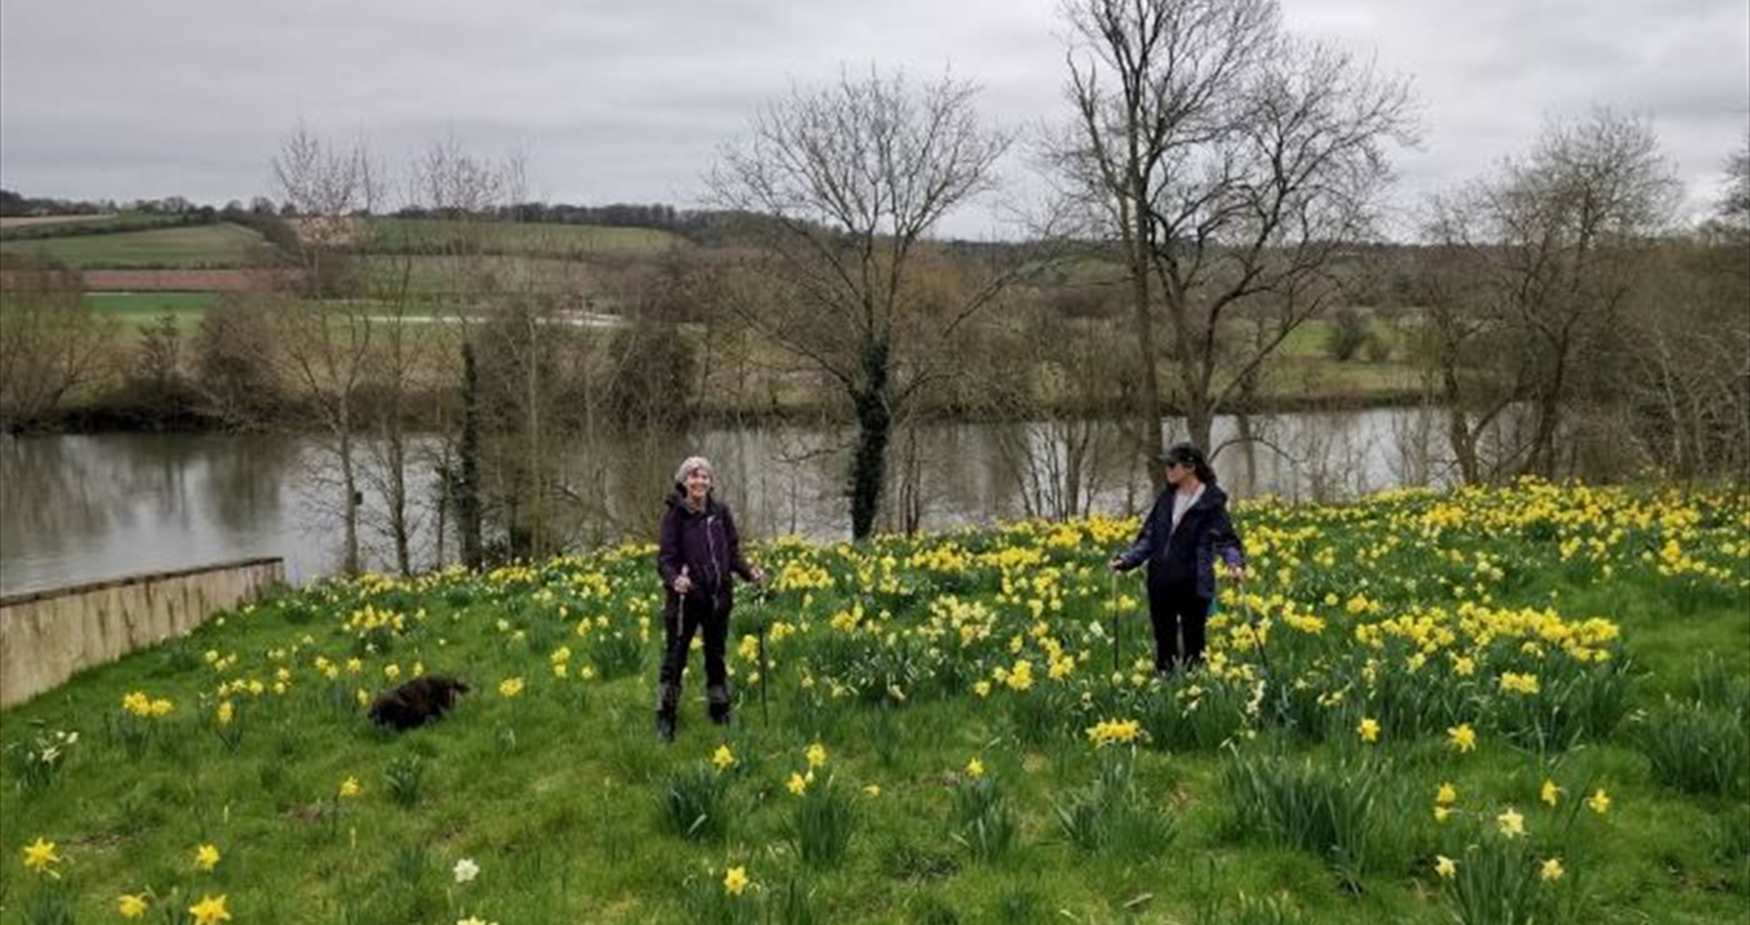 Daffodils at Culham Court Aston, River Thames (A Foot in the Chilterns)